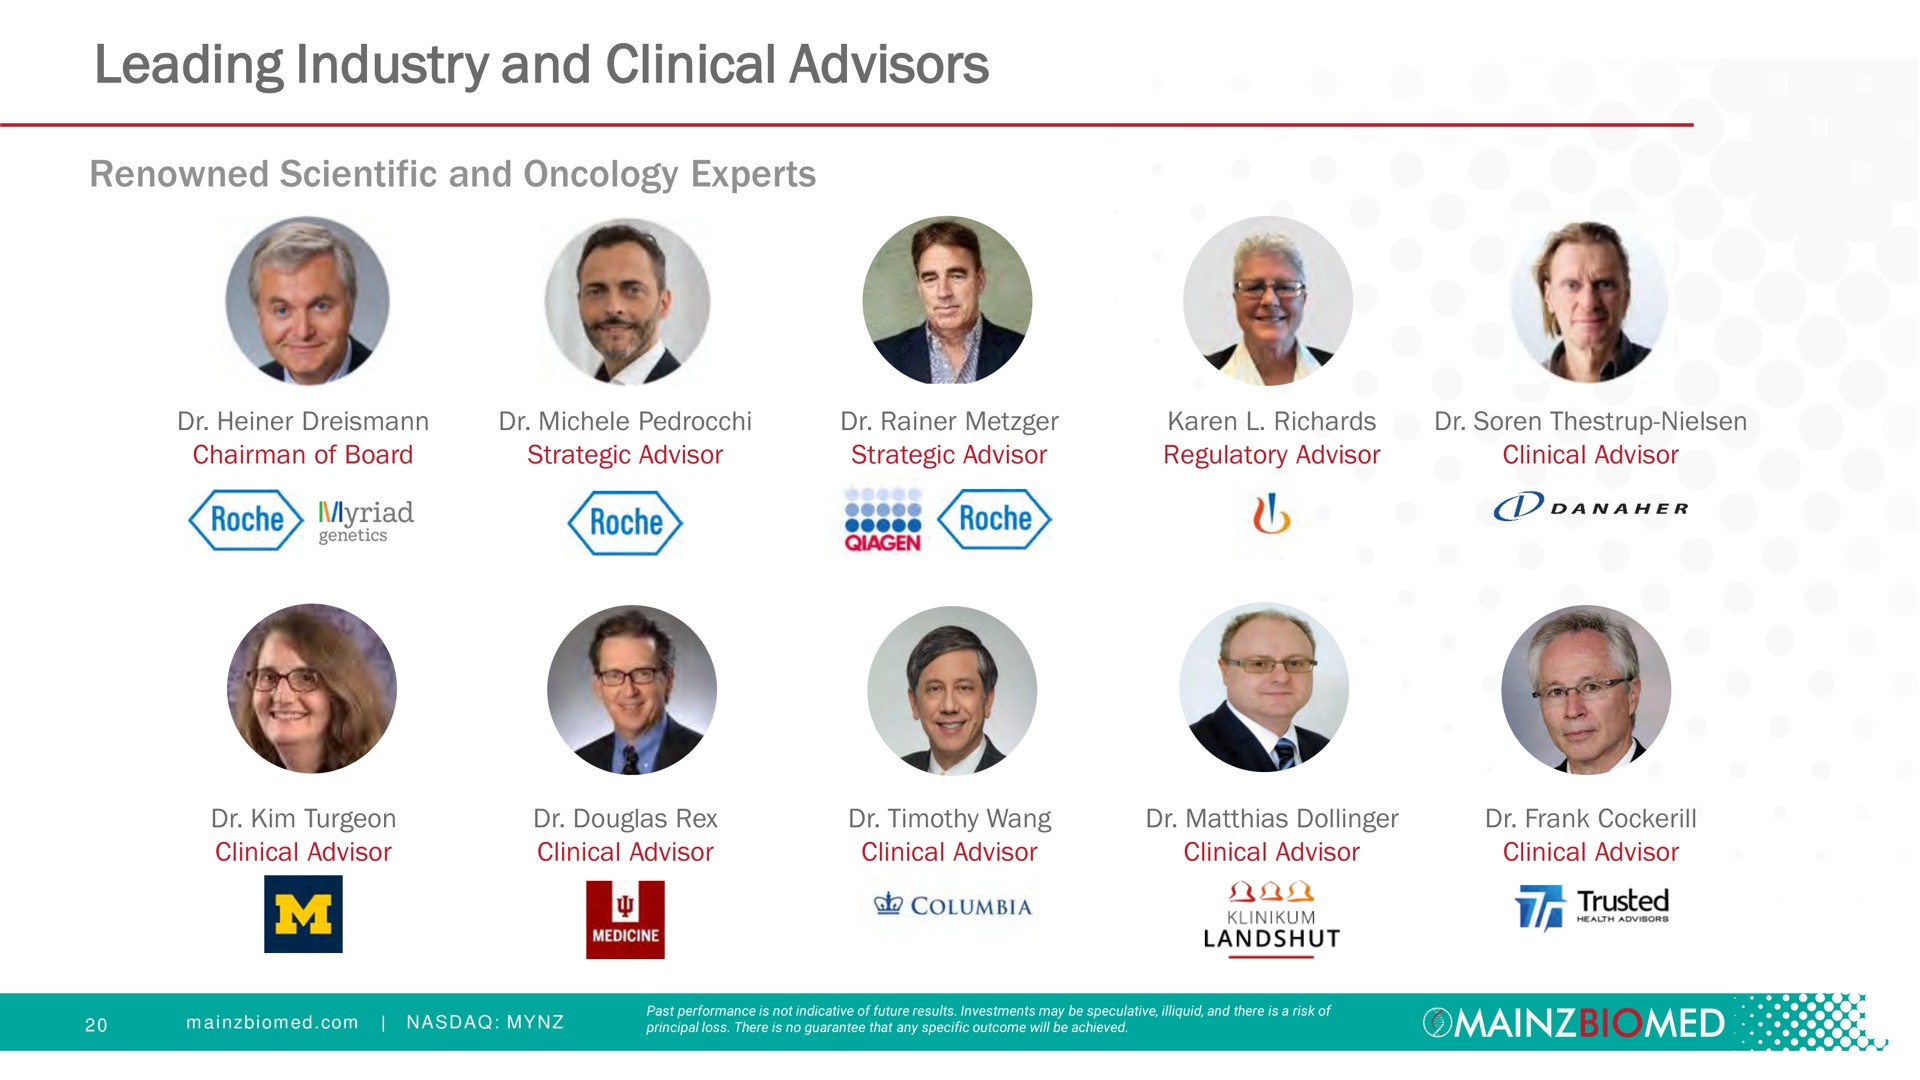 leading industry and clinical advisors | Mainz Biomed NV